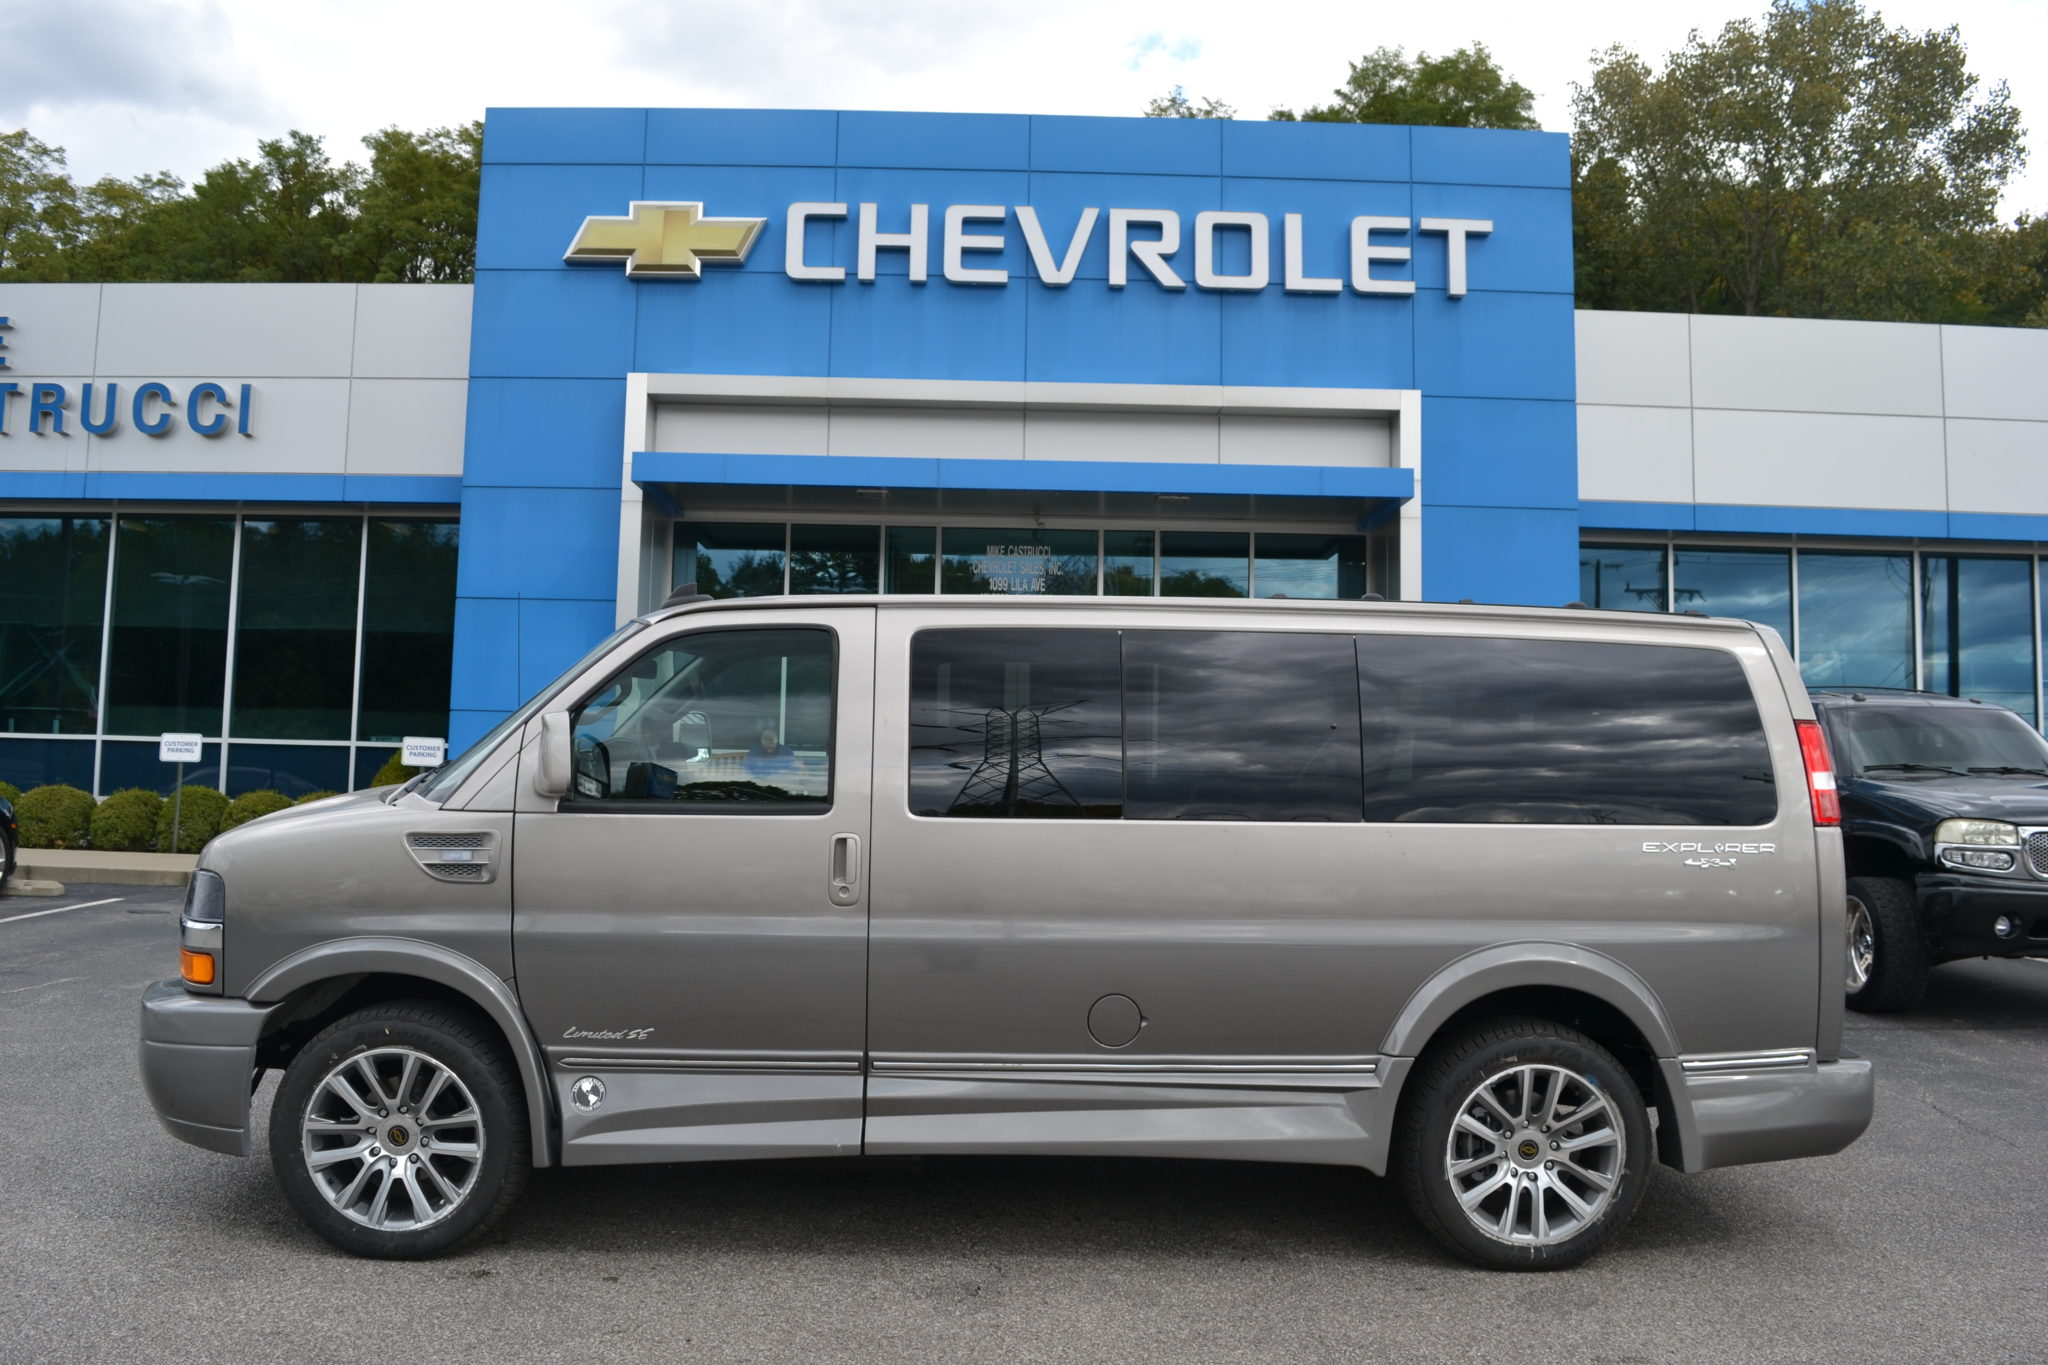 2020 Chevy Express 2500 4X4 Explorer Limited XSE Mike Castrucci